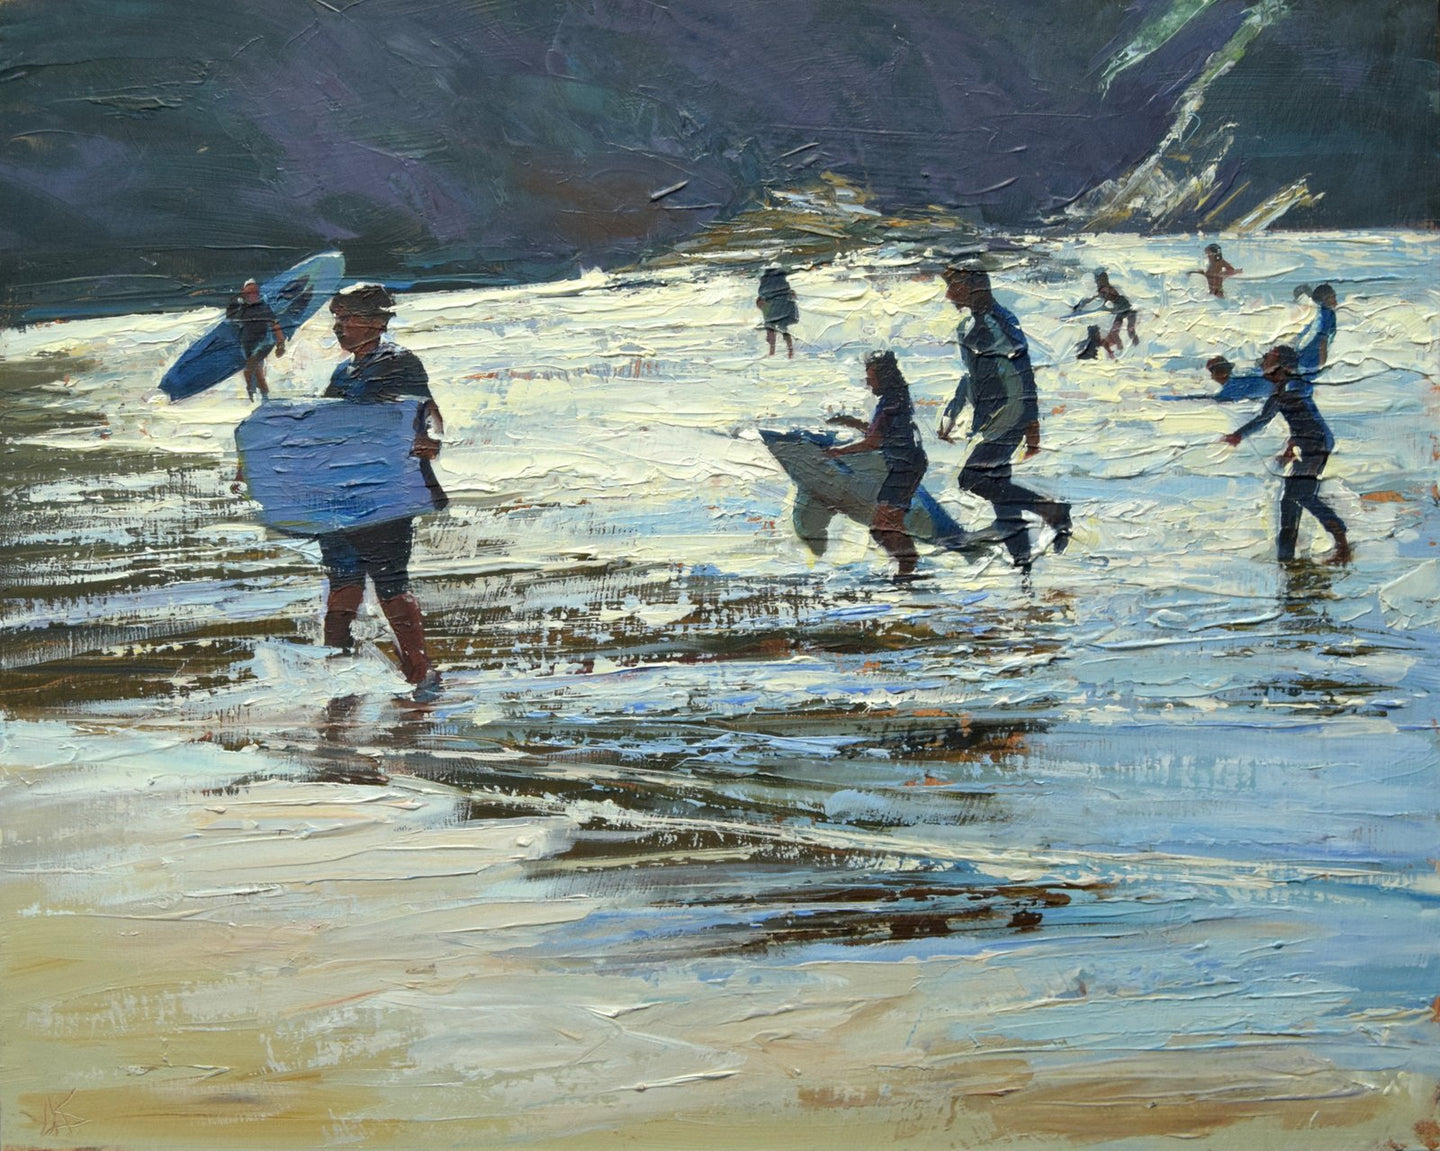 Medium sized oil painting of adults and children in the surf with their surfboards, looking straight into the sun